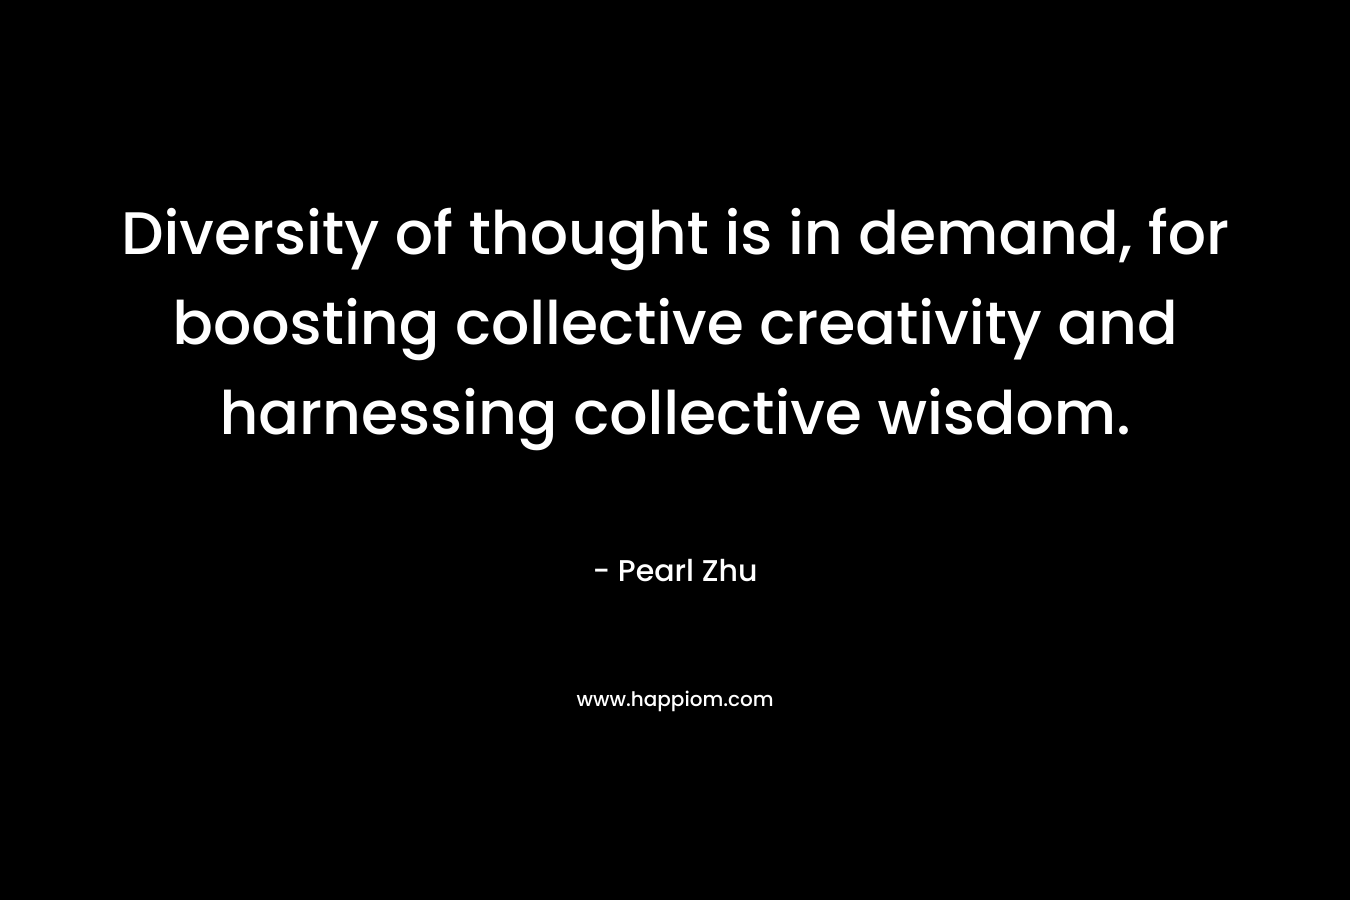 Diversity of thought is in demand, for boosting collective creativity and harnessing collective wisdom. – Pearl Zhu